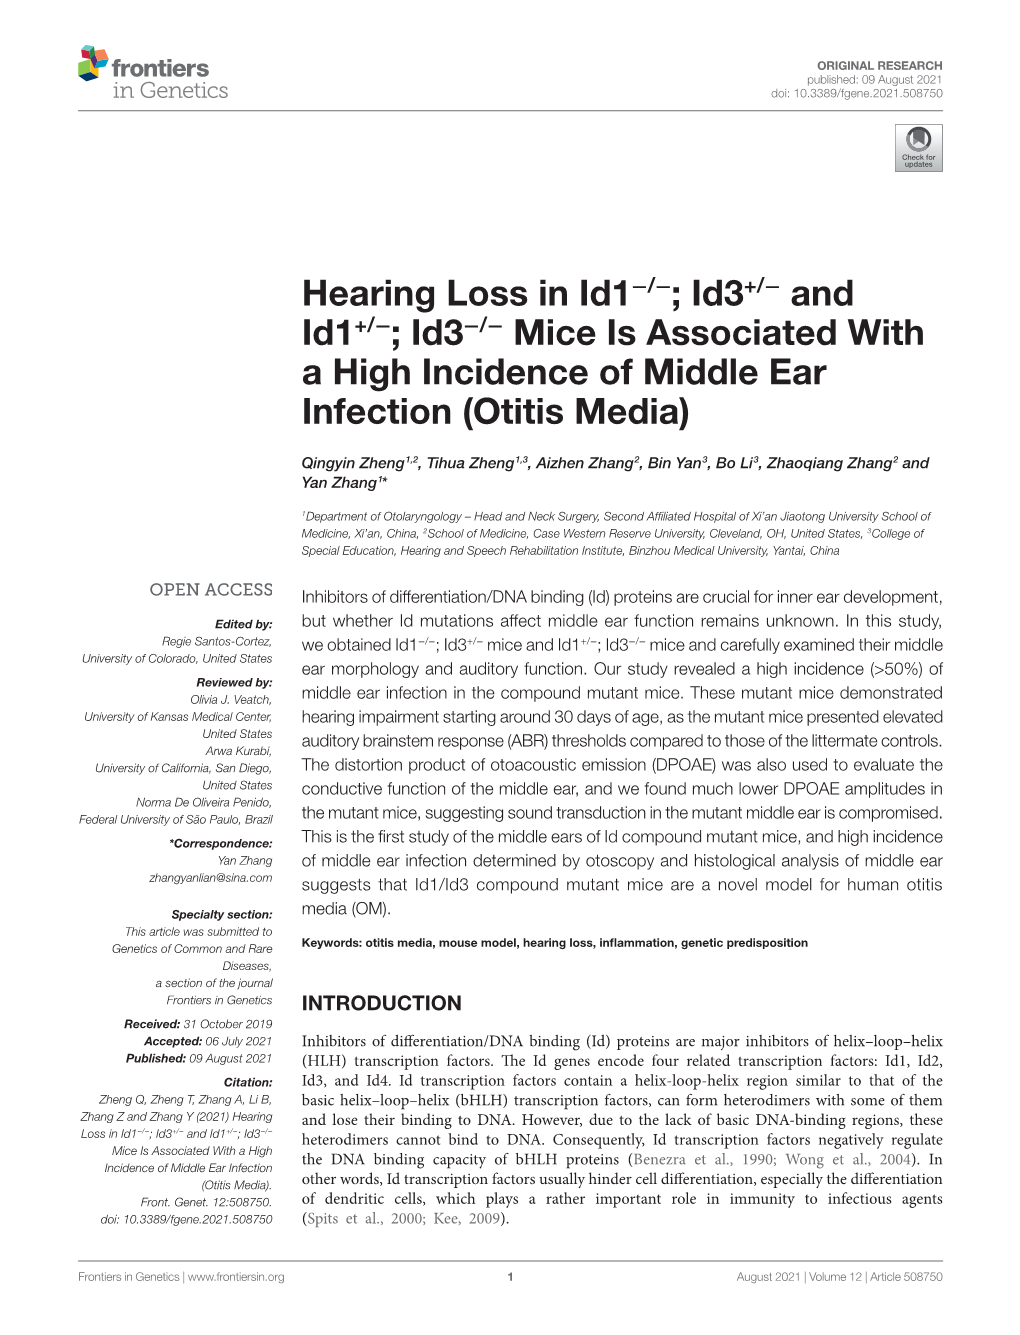 Hearing Loss in Id1−/−; Id3+/− and Id1+/−; Id3−/− Mice Is Associated with a High Incidence of Middle Ear Infection (Otitis Media)